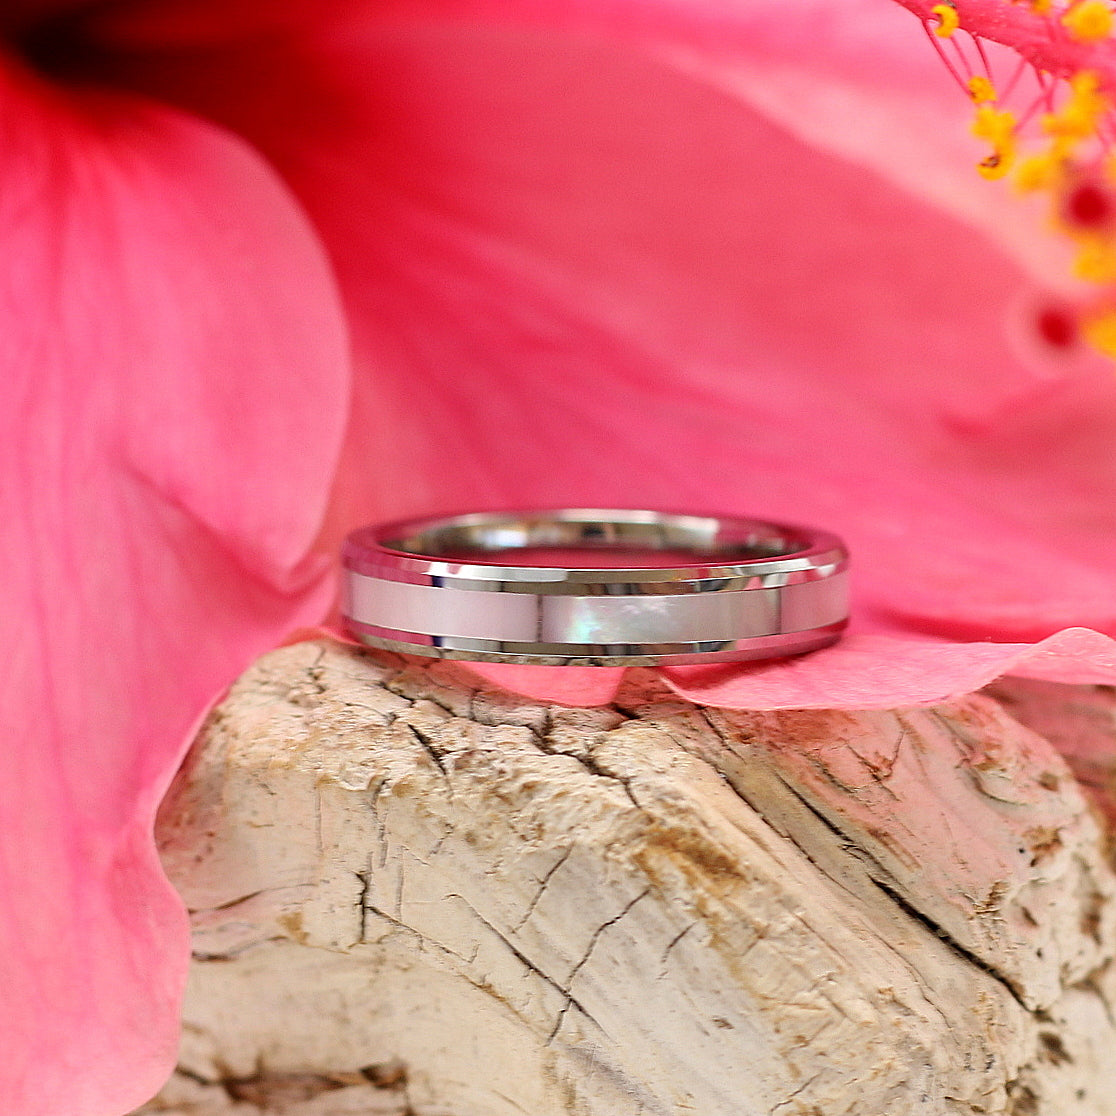 The Mother of Pearl | Men's Titanium Ring with Pearl Inlay – Rustic and Main